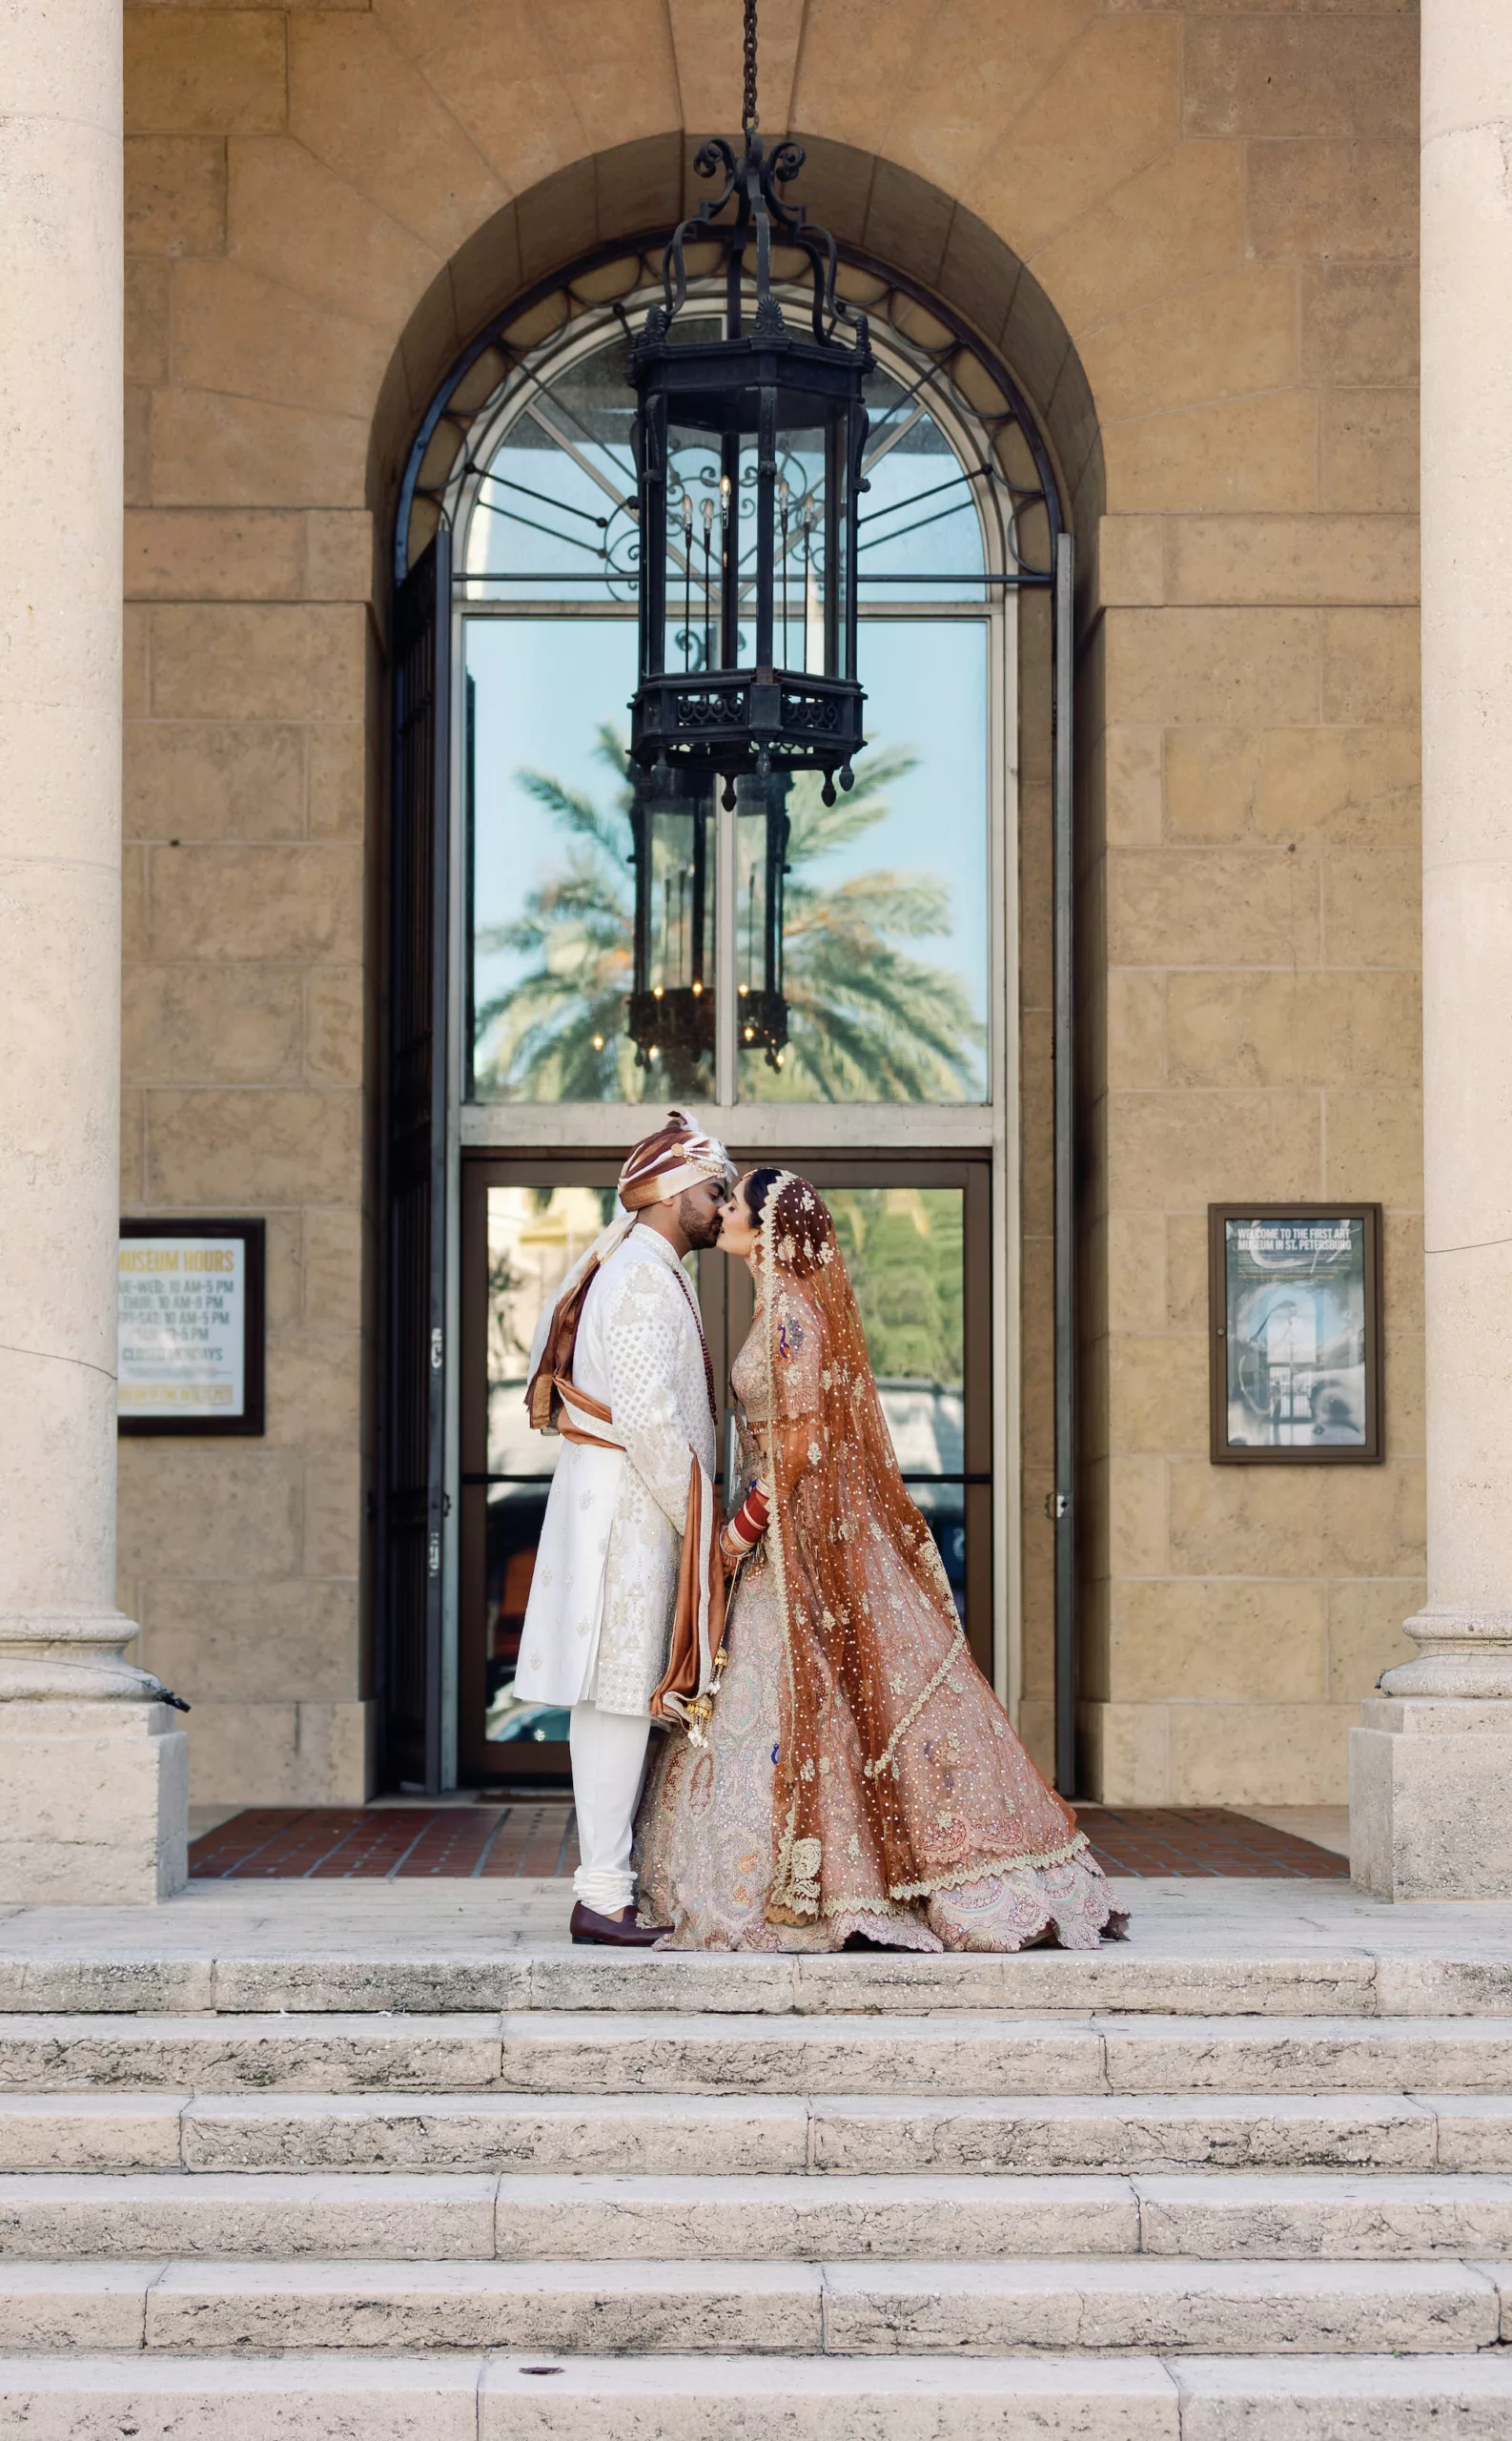 Bride and Groom First Look Wedding Portrait | Neutral Burnt Orange and Cream Beaded Rimple and Harpreet Lehenga Indian Wedding Dress Inspiration | White and Brown Groom's Sherwani Wedding Attire Ideas | Tampa Bay Event Venue Museum of Fine Arts